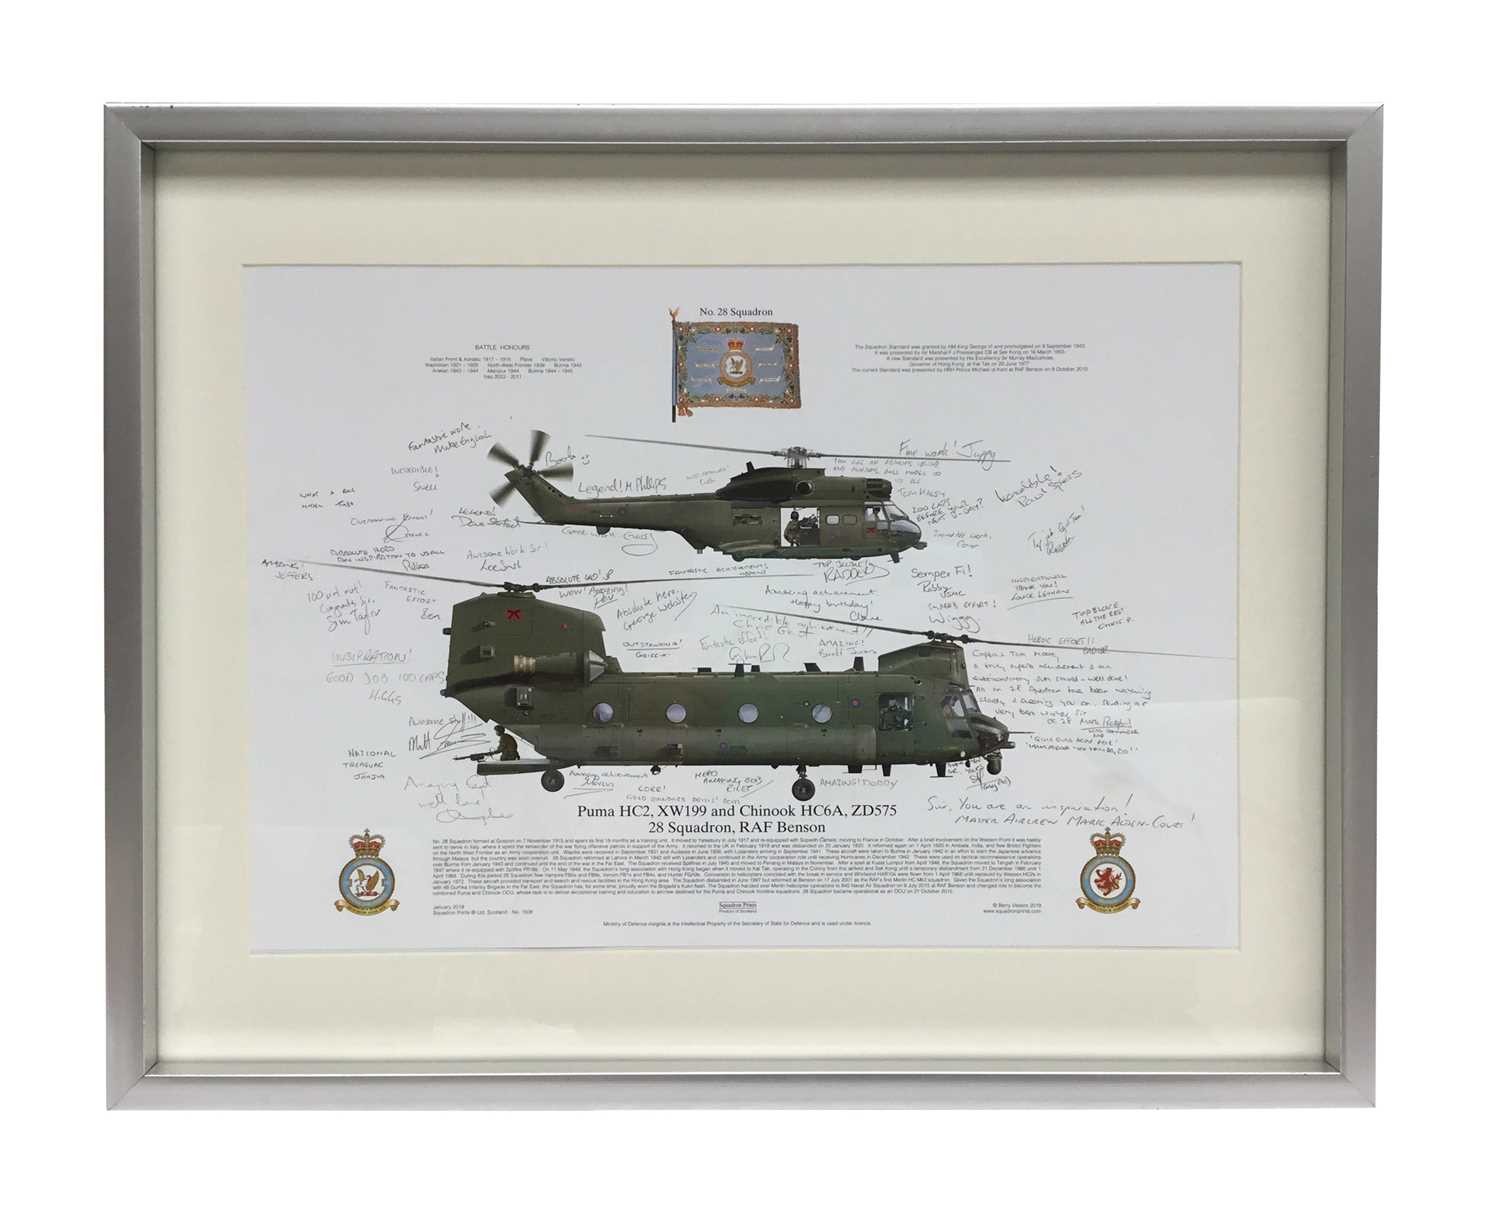 Chinook Helicopter signed 28 Squadron RAF Benson